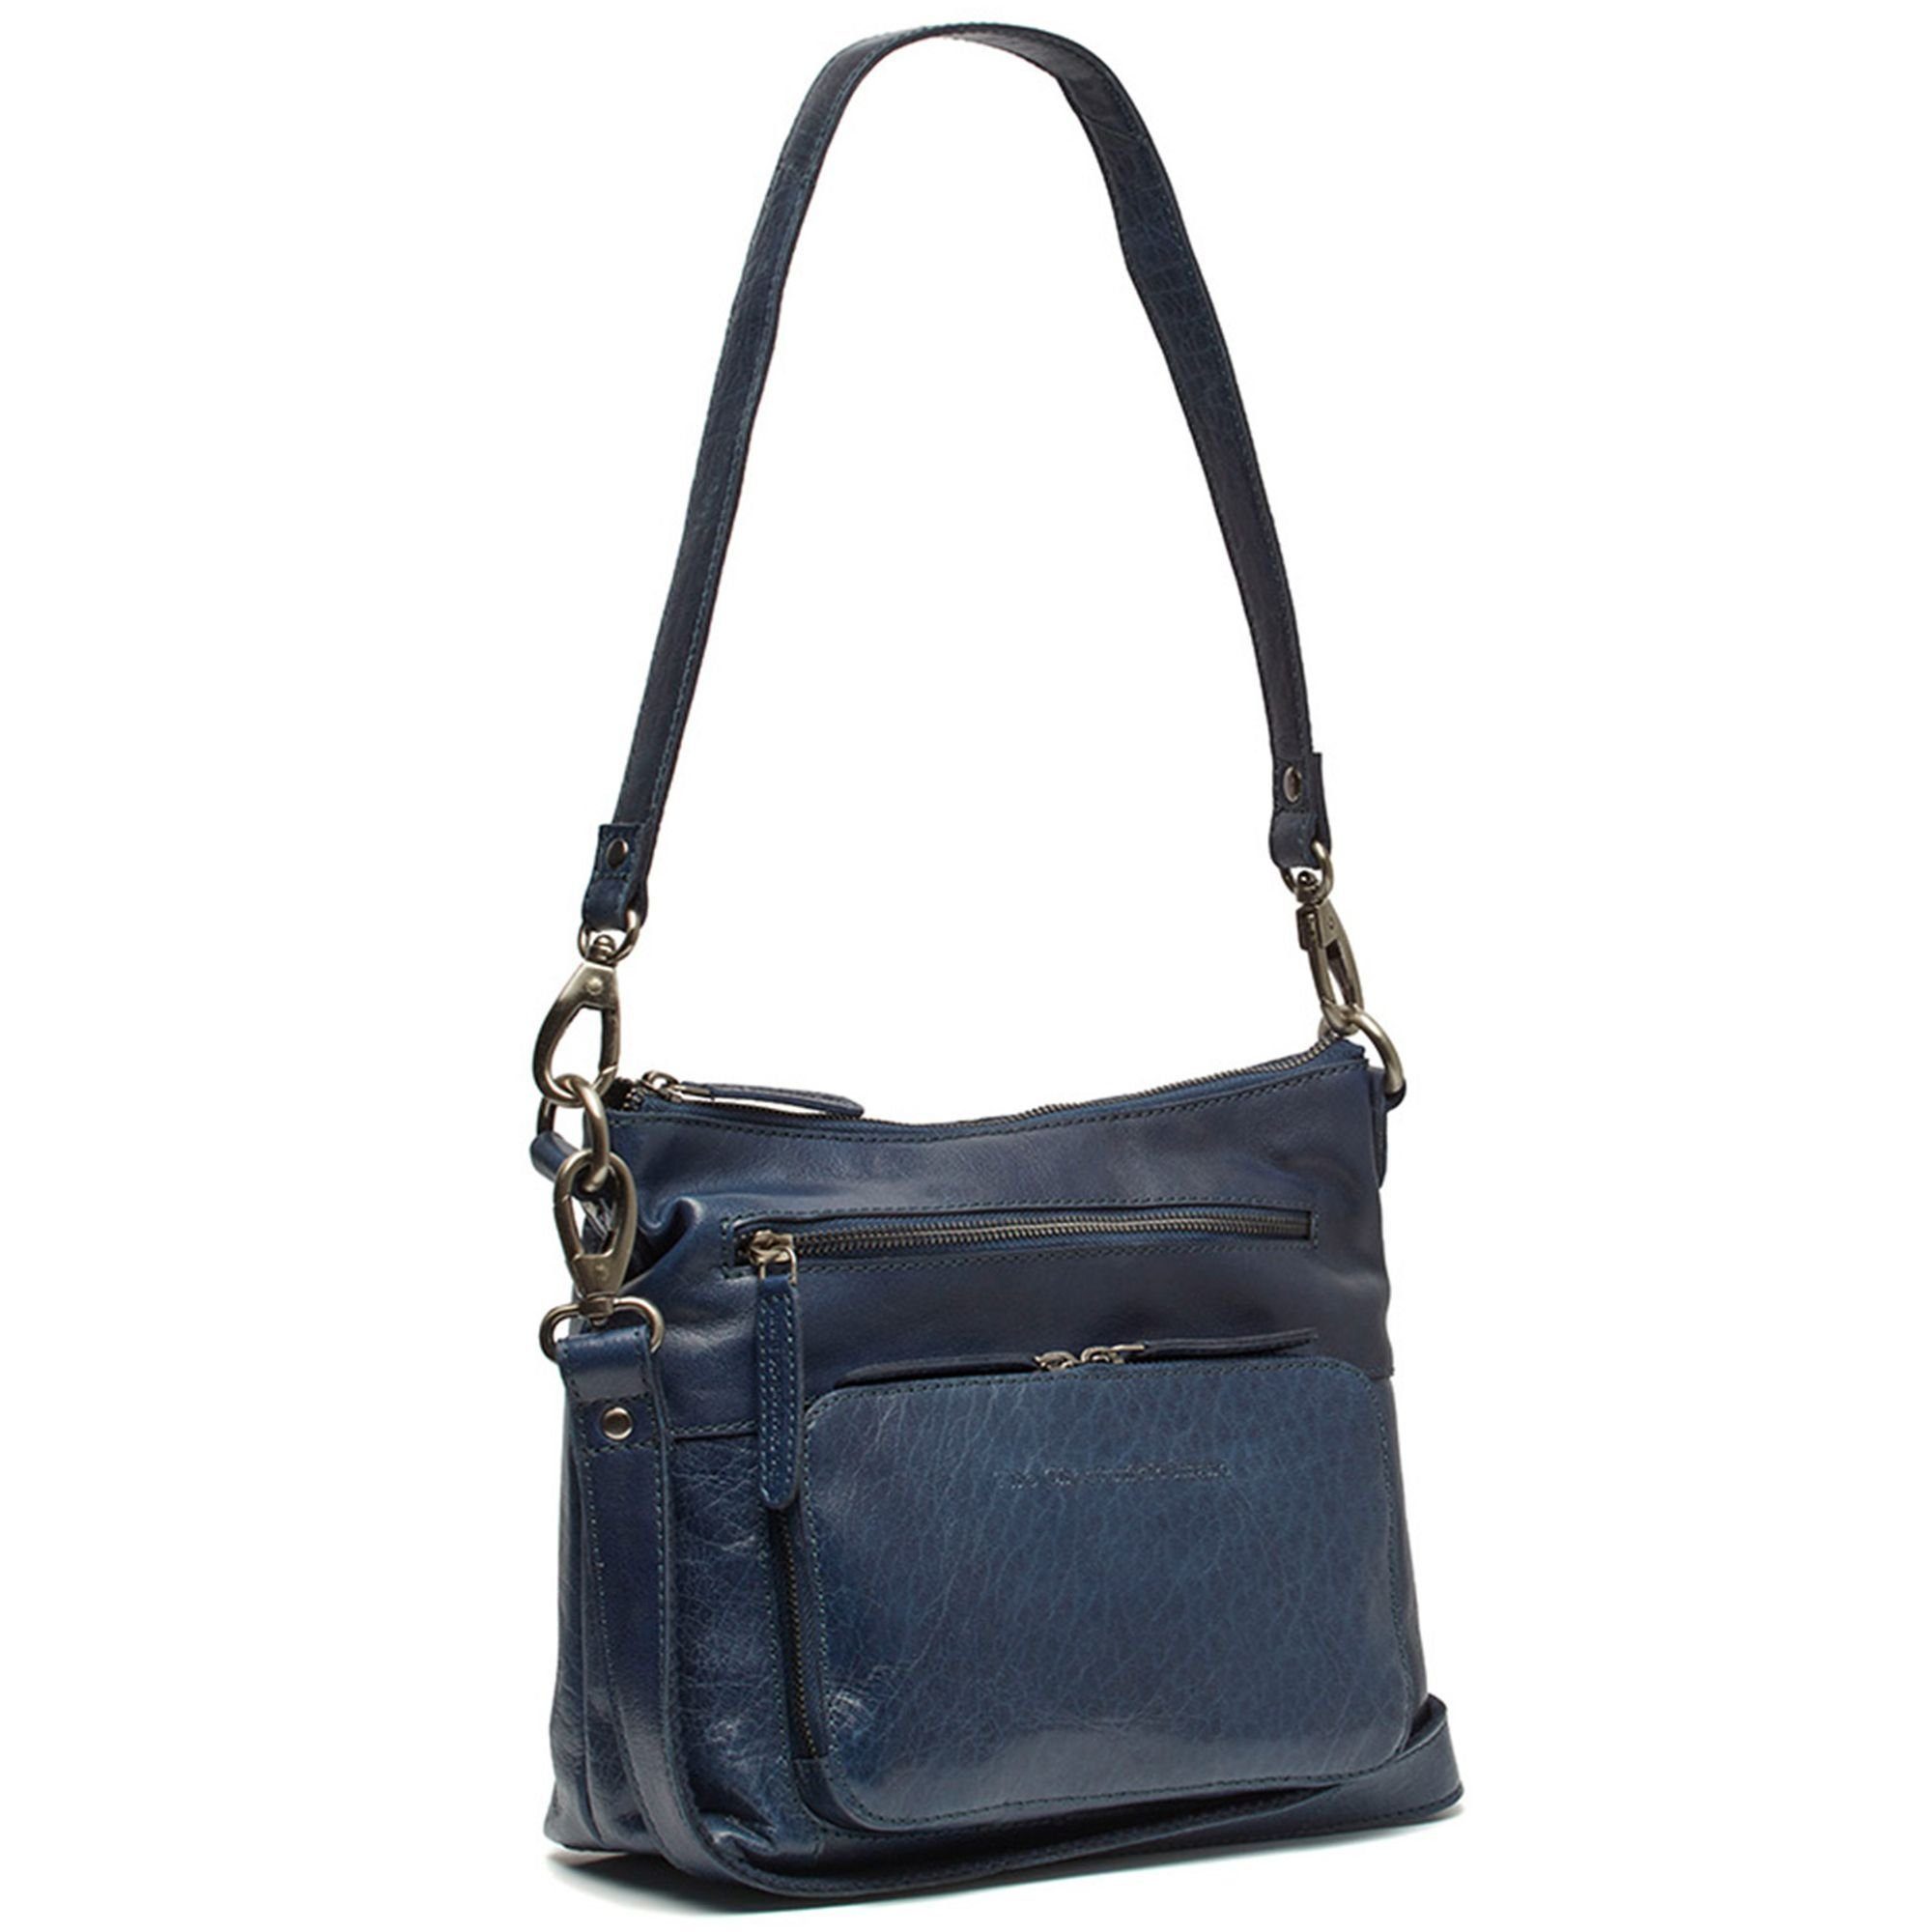 The Chesterfield Brand Schultertasche navy Tula, Leder